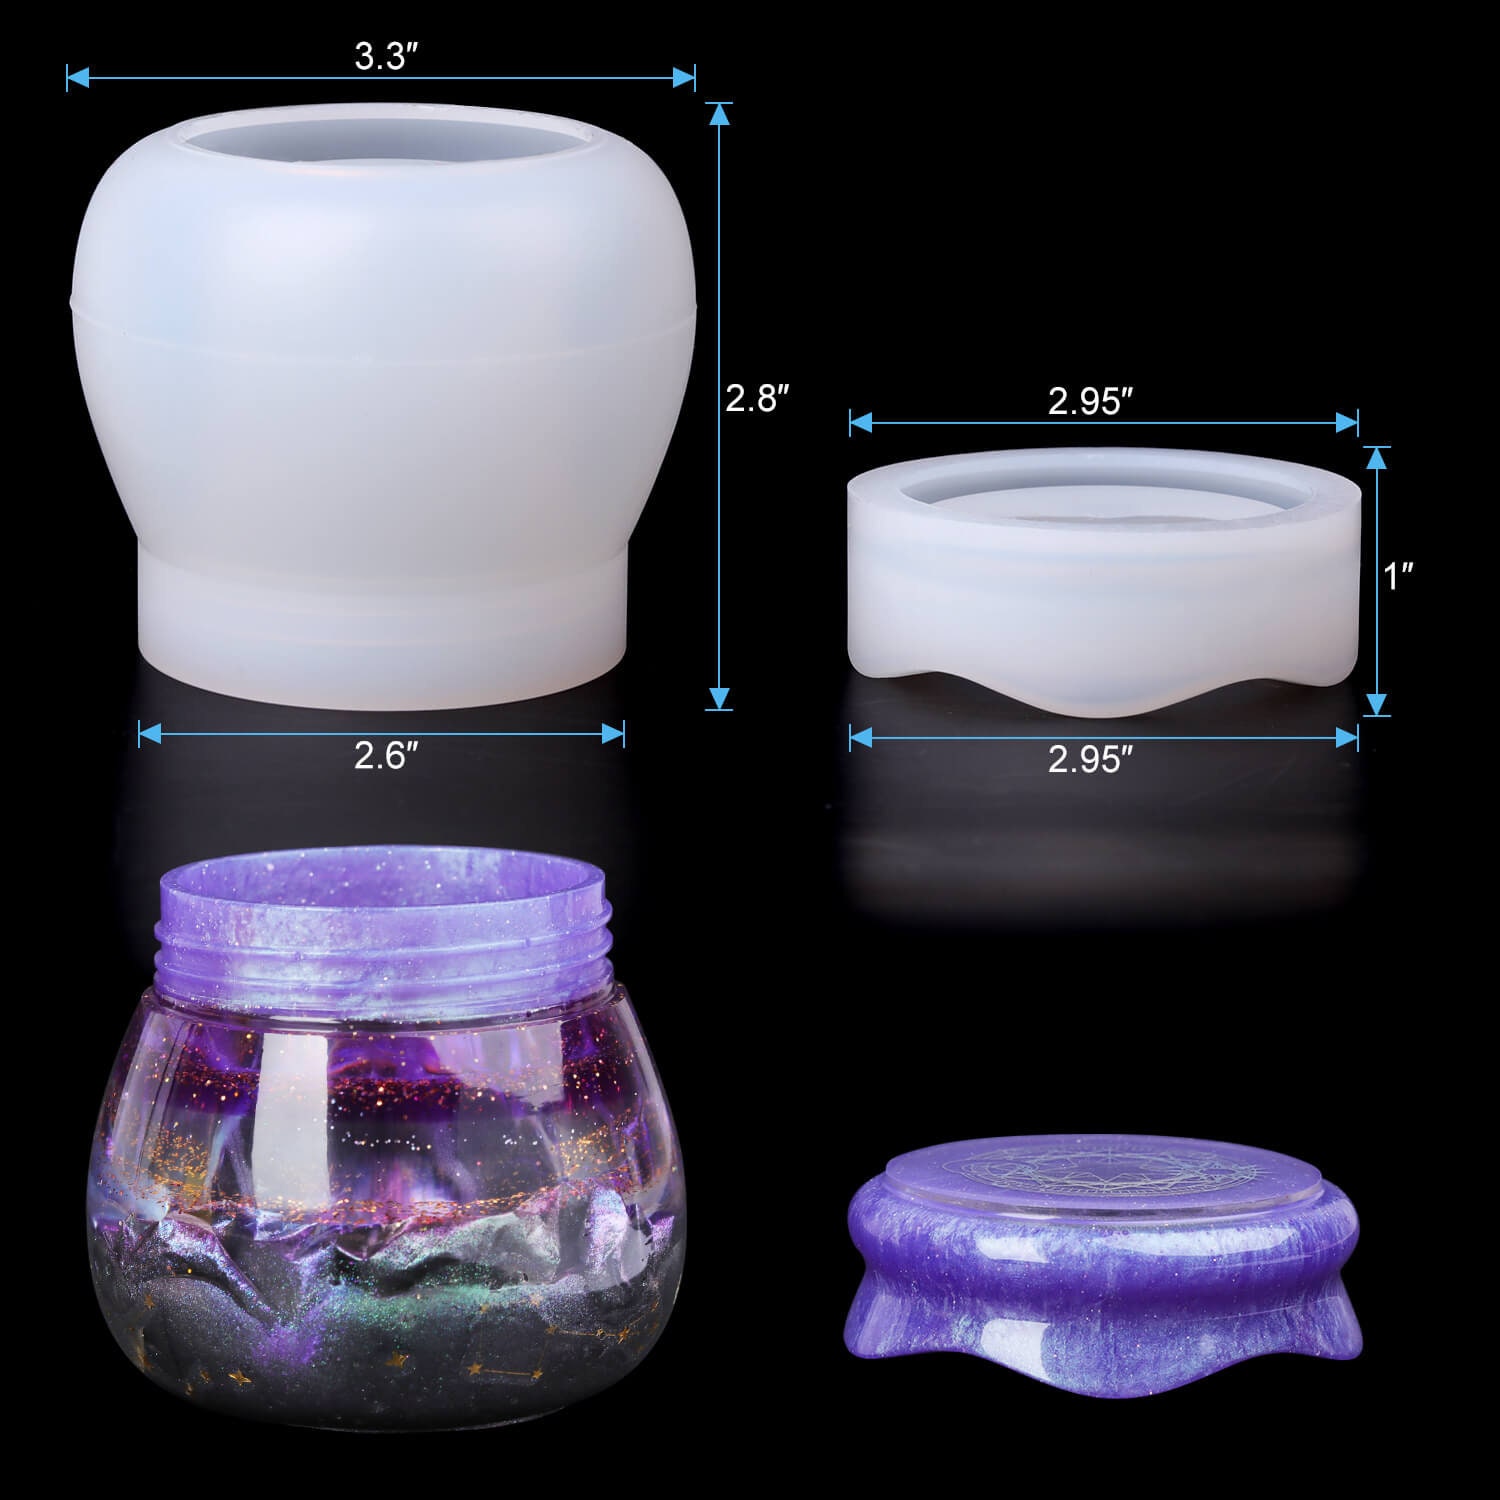 Sunyok Jar Resin Molds Silicone, Pudding Jar Resin Molds with Lid, Epoxy Molds Silicone for Storage Bottle,Candle Holder,Candy Container, Epoxy Resin